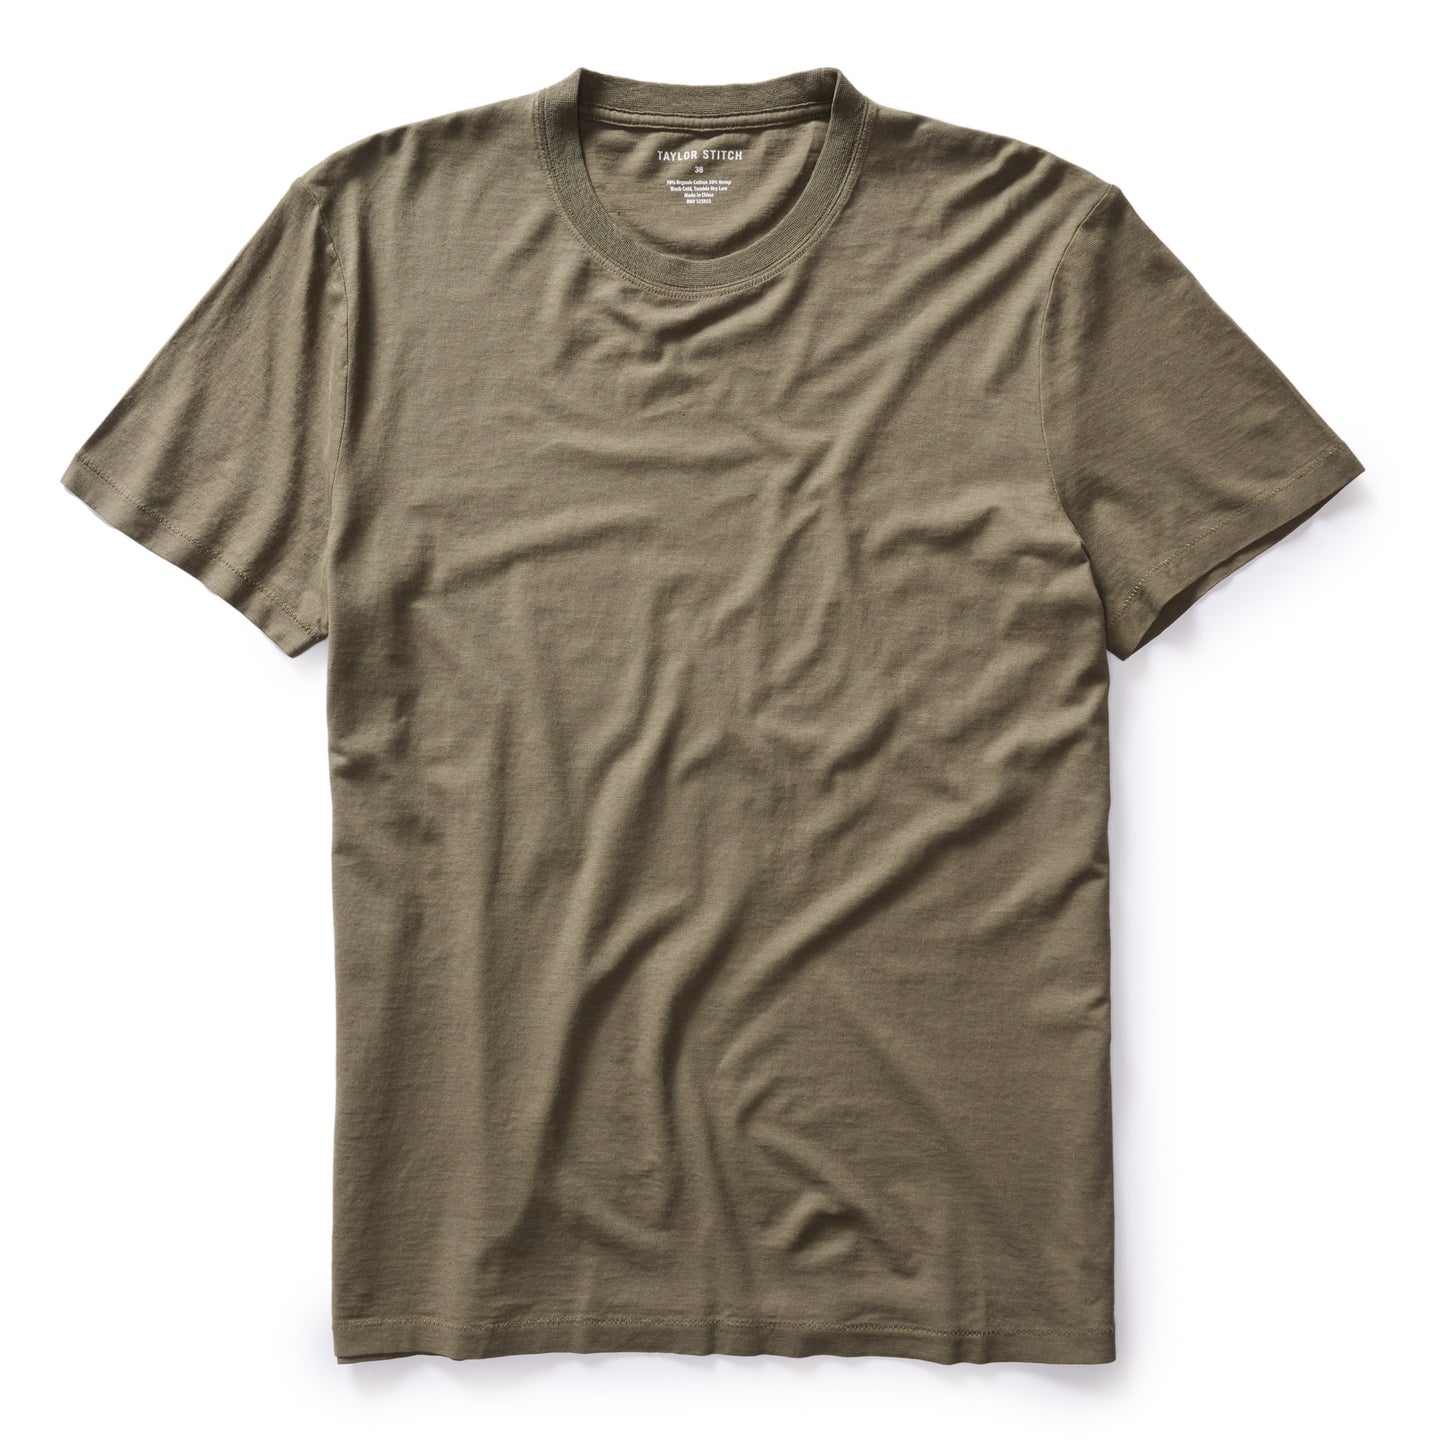 Taylor Stitch - The Cotton Hemp Tee in Olive